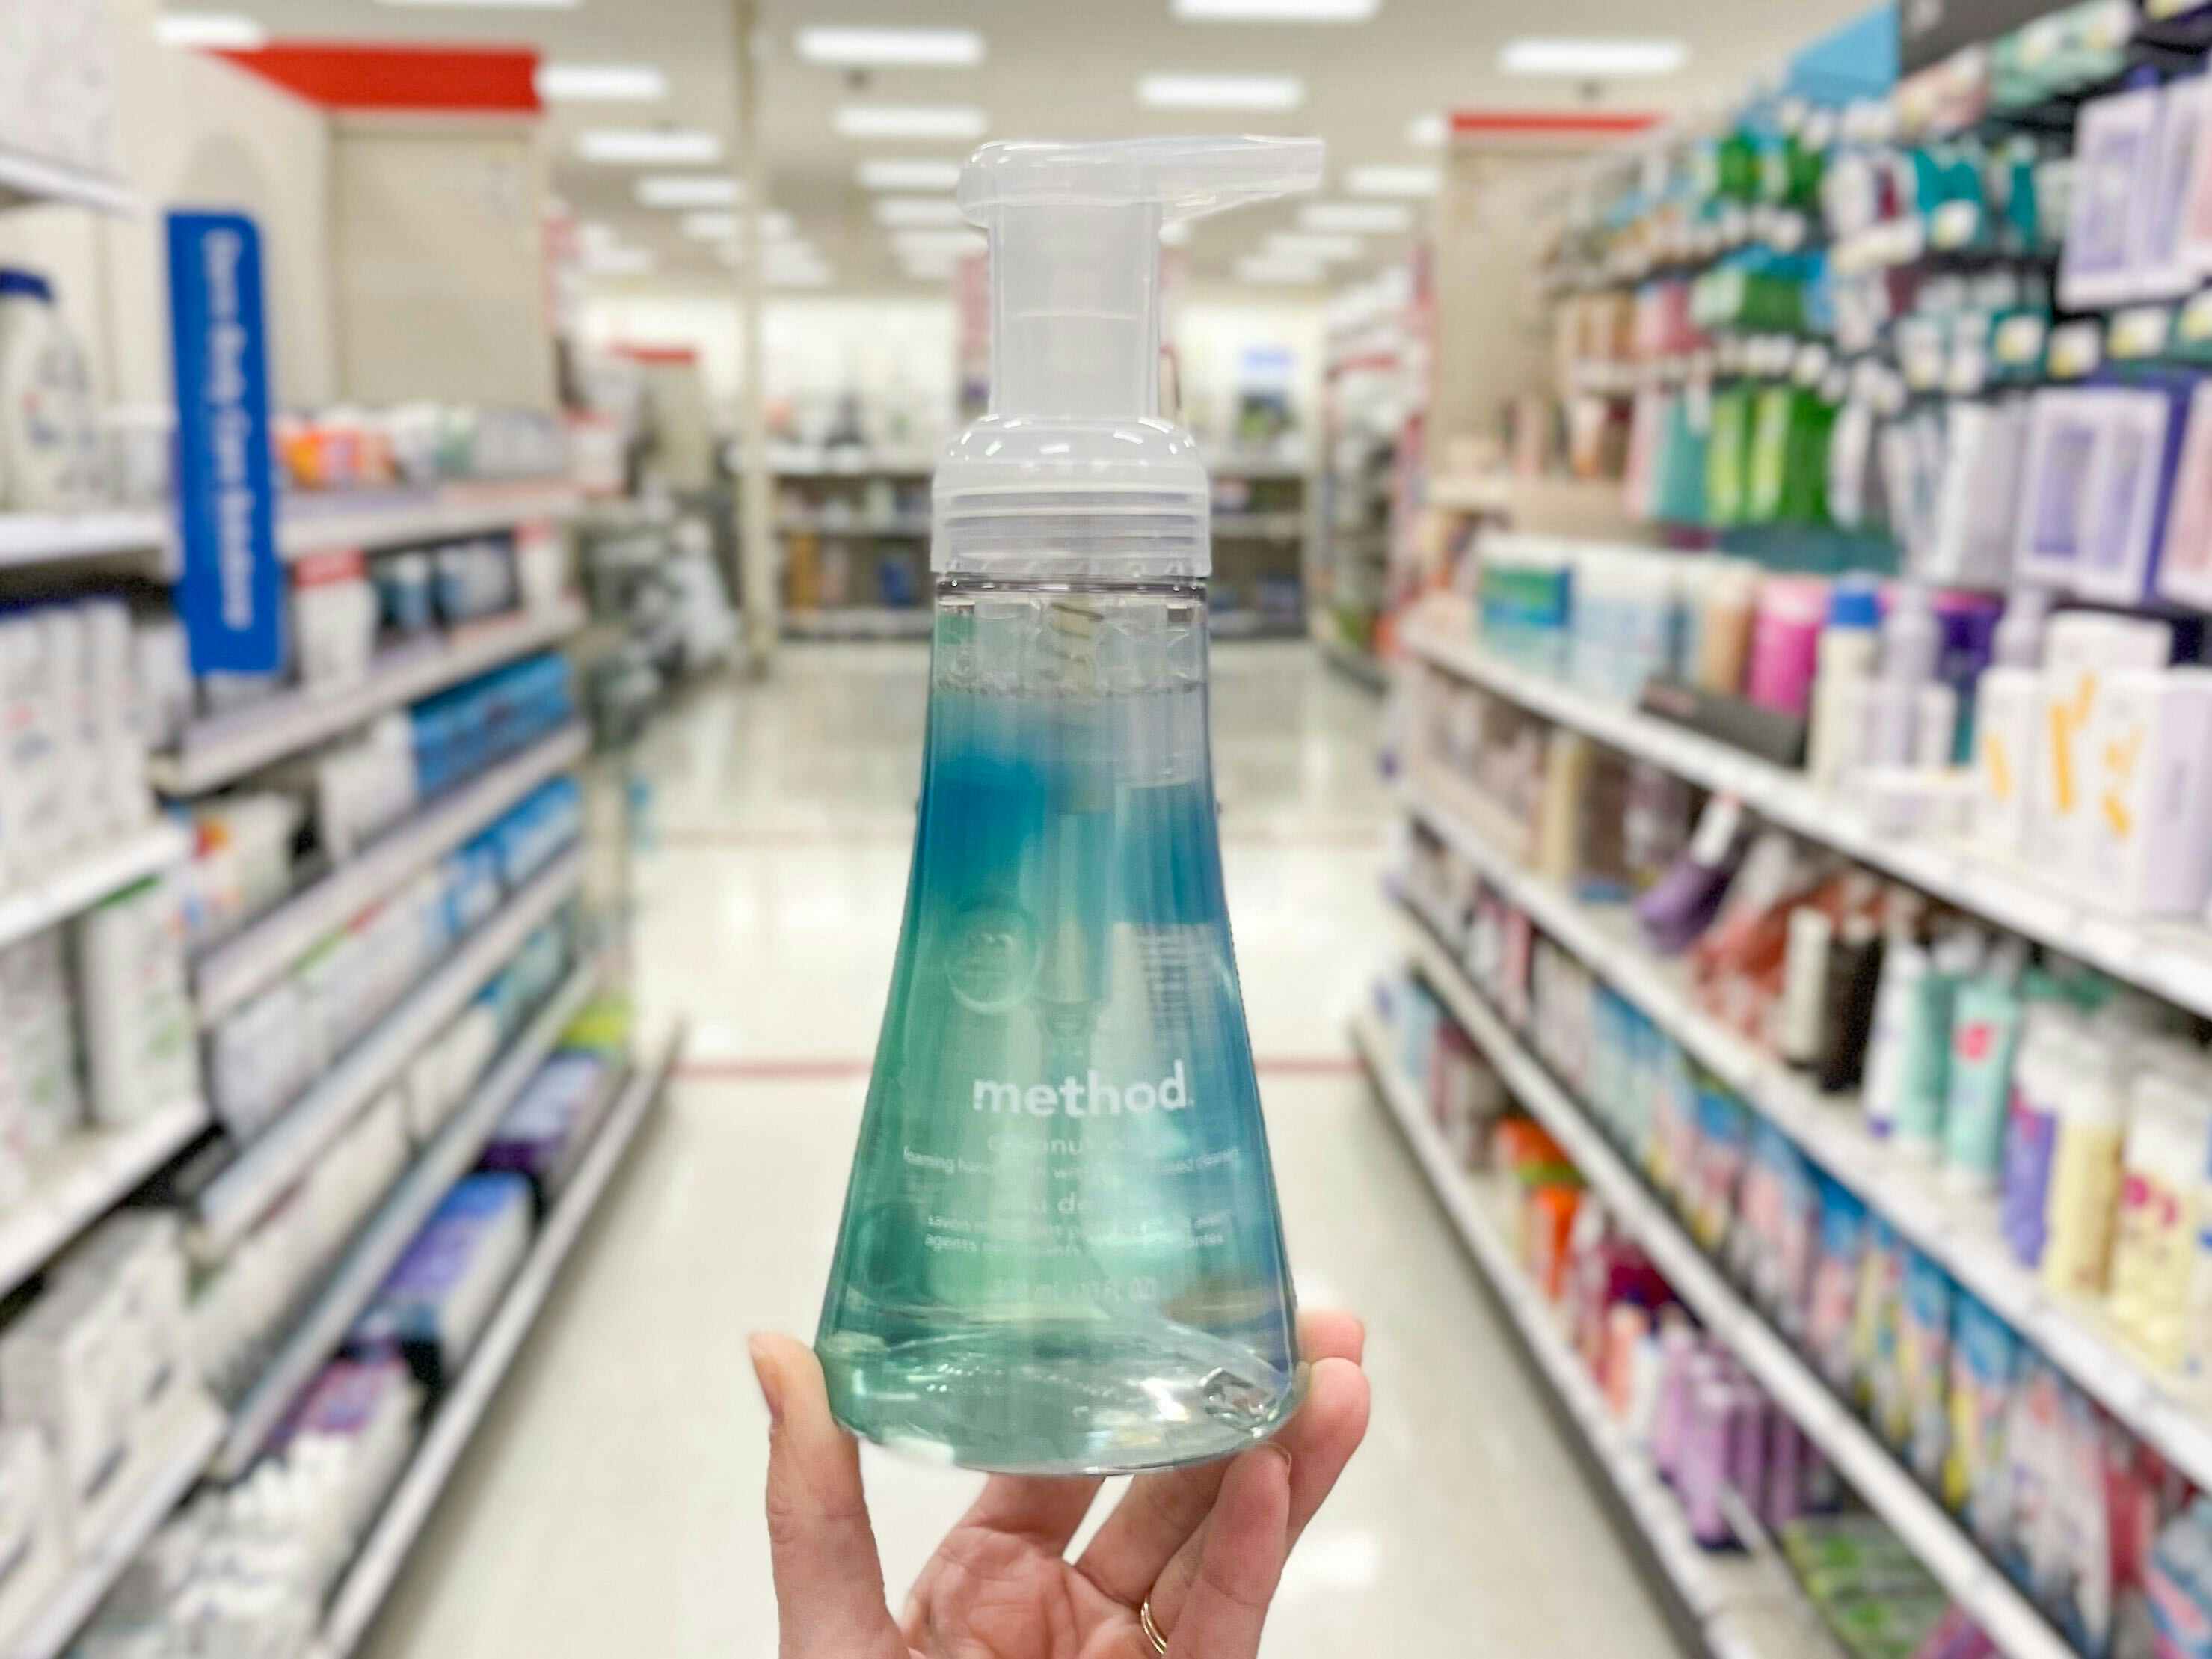 A Method hand soap held out by hand in front of a store aisle.